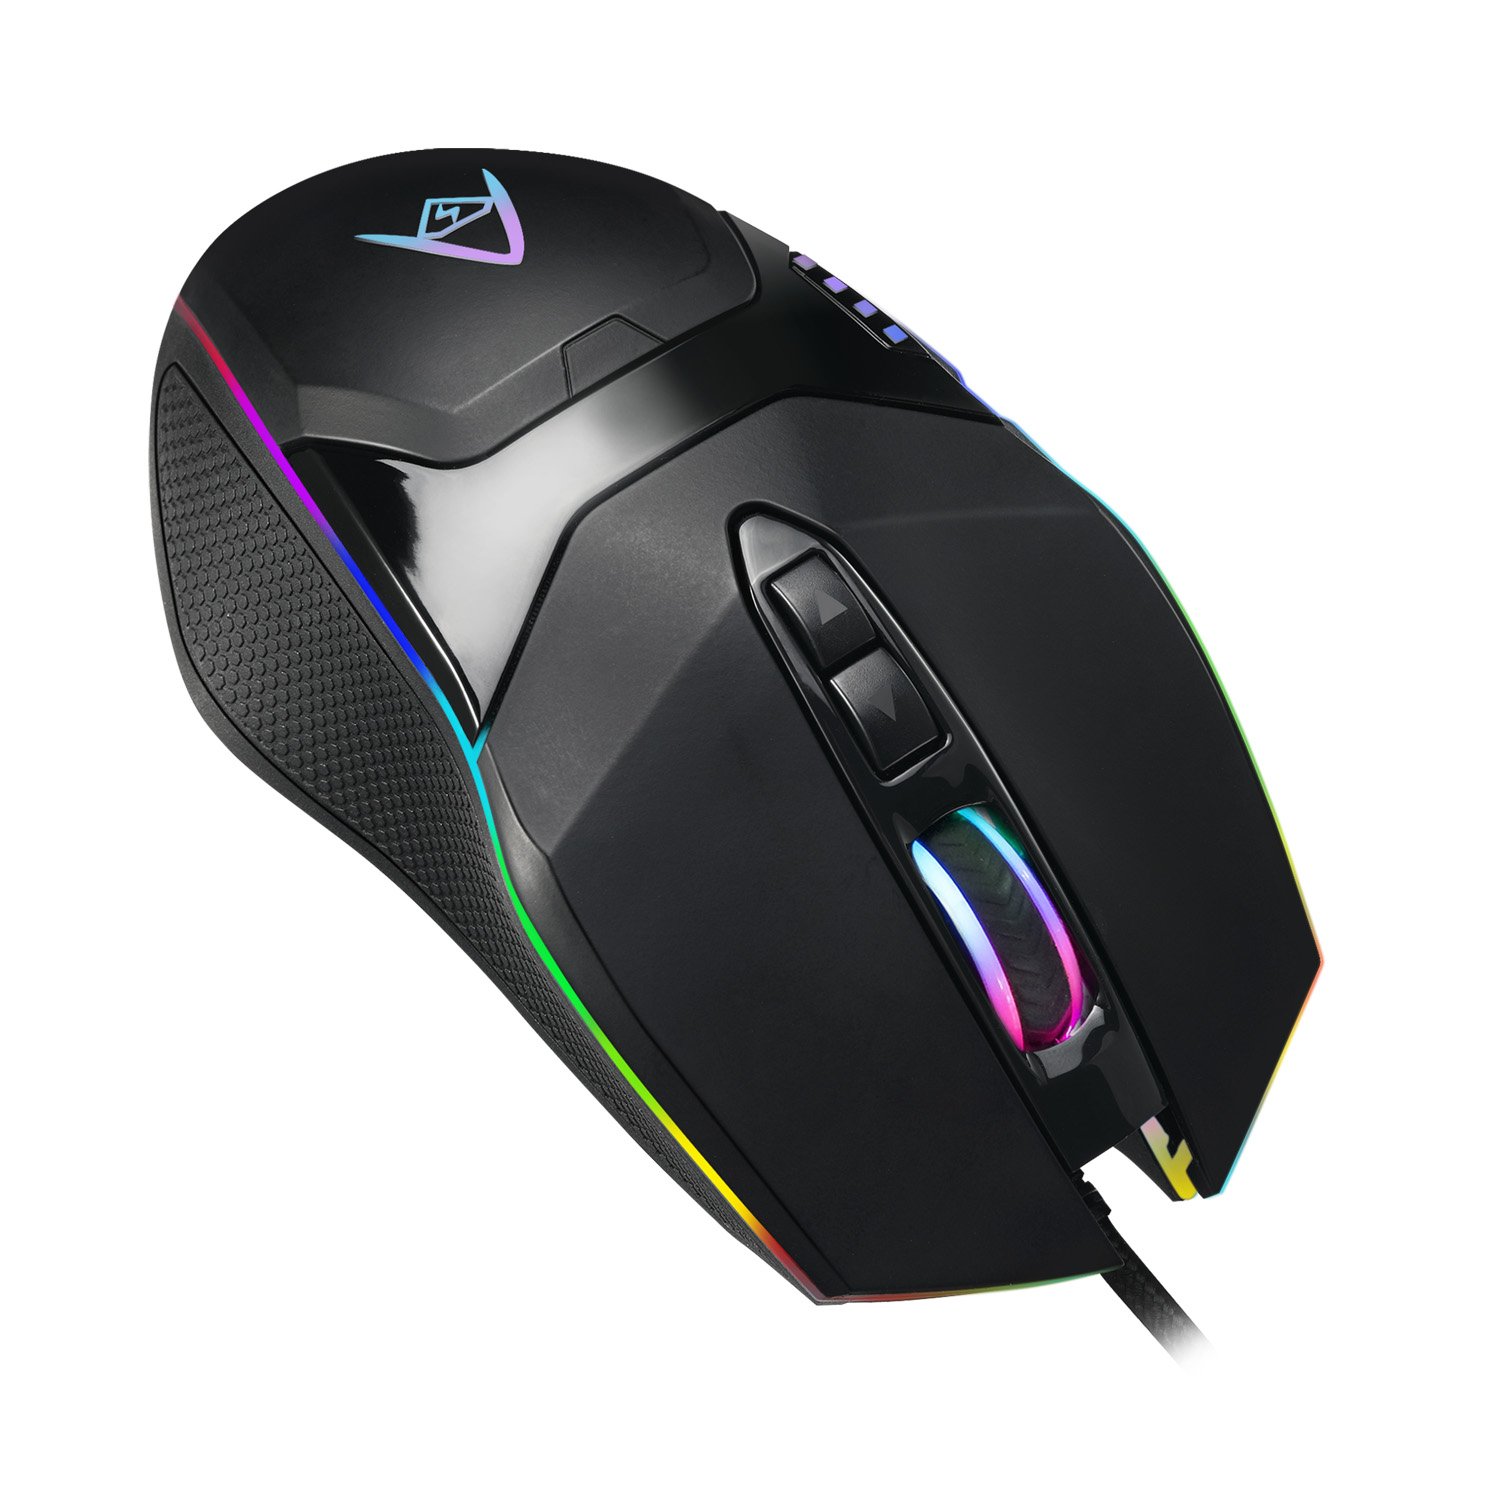 Adesso iMouse X5 RGB Illuminated 7-Button Ambidextrous Gaming Mouse